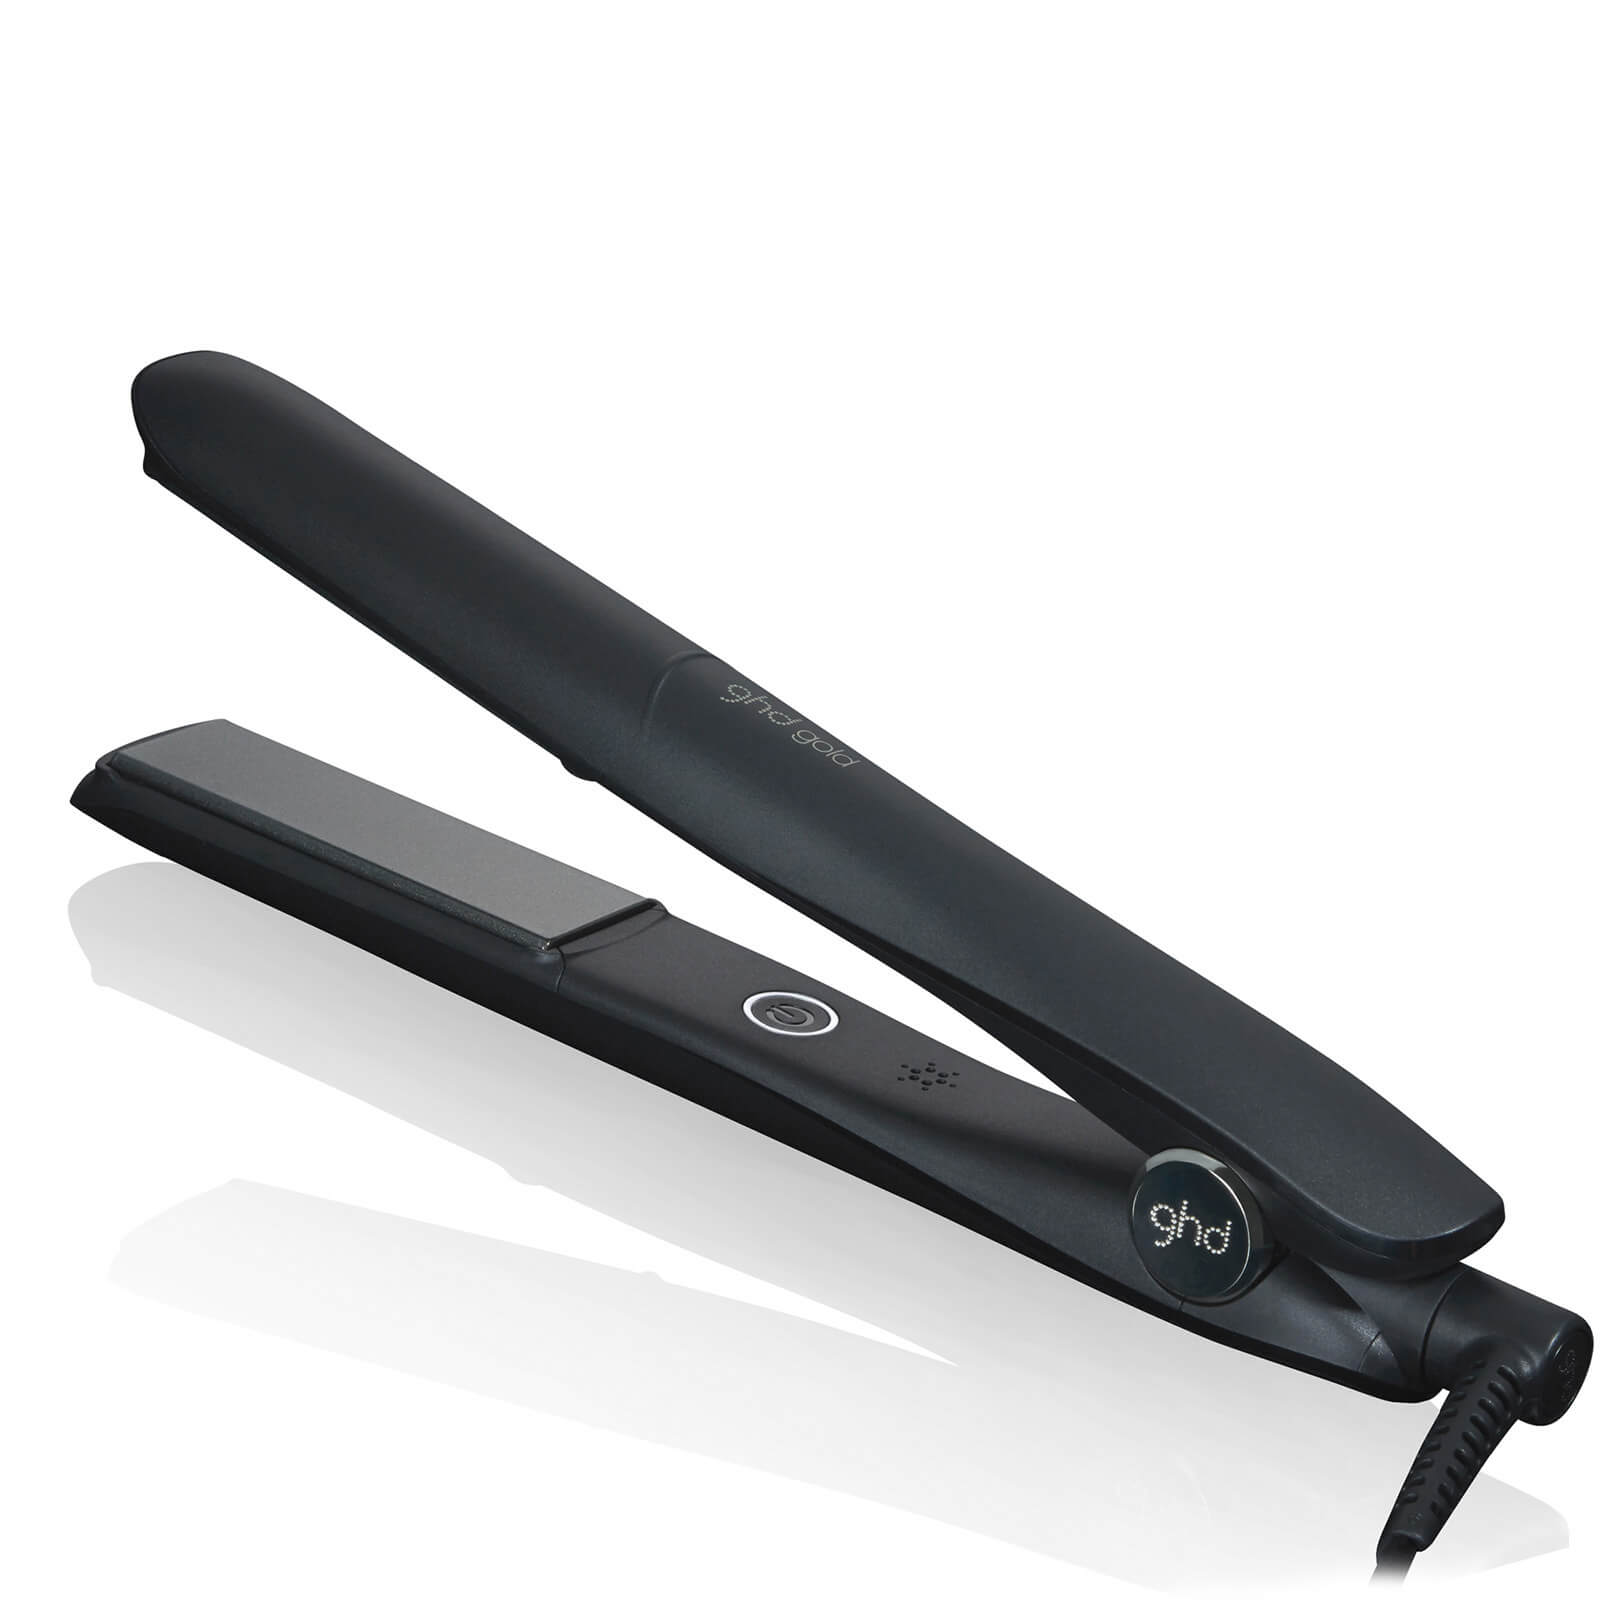 GHD Platinum Plus review: Is the styler worth the hype? - mamabella